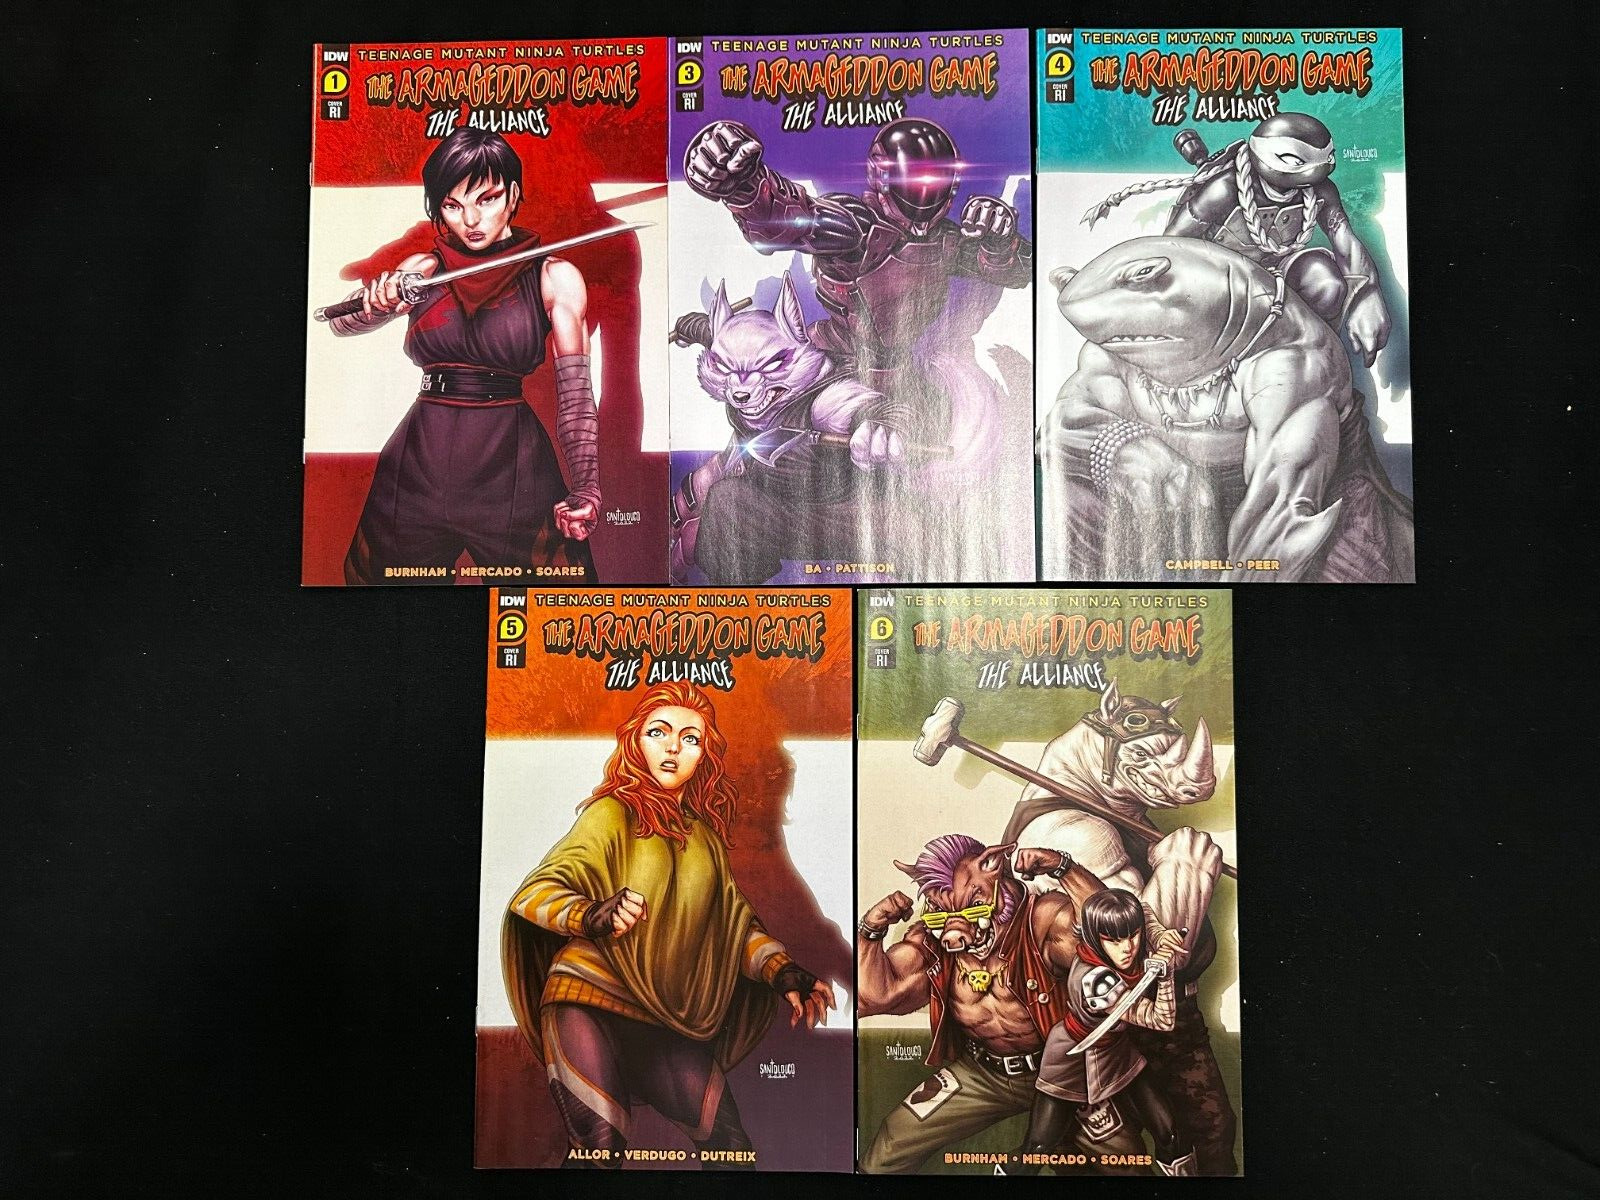 TMNT Armageddon Game The Alliance #1,3-6 All 1:10 Incentive Covers IDW Eastman